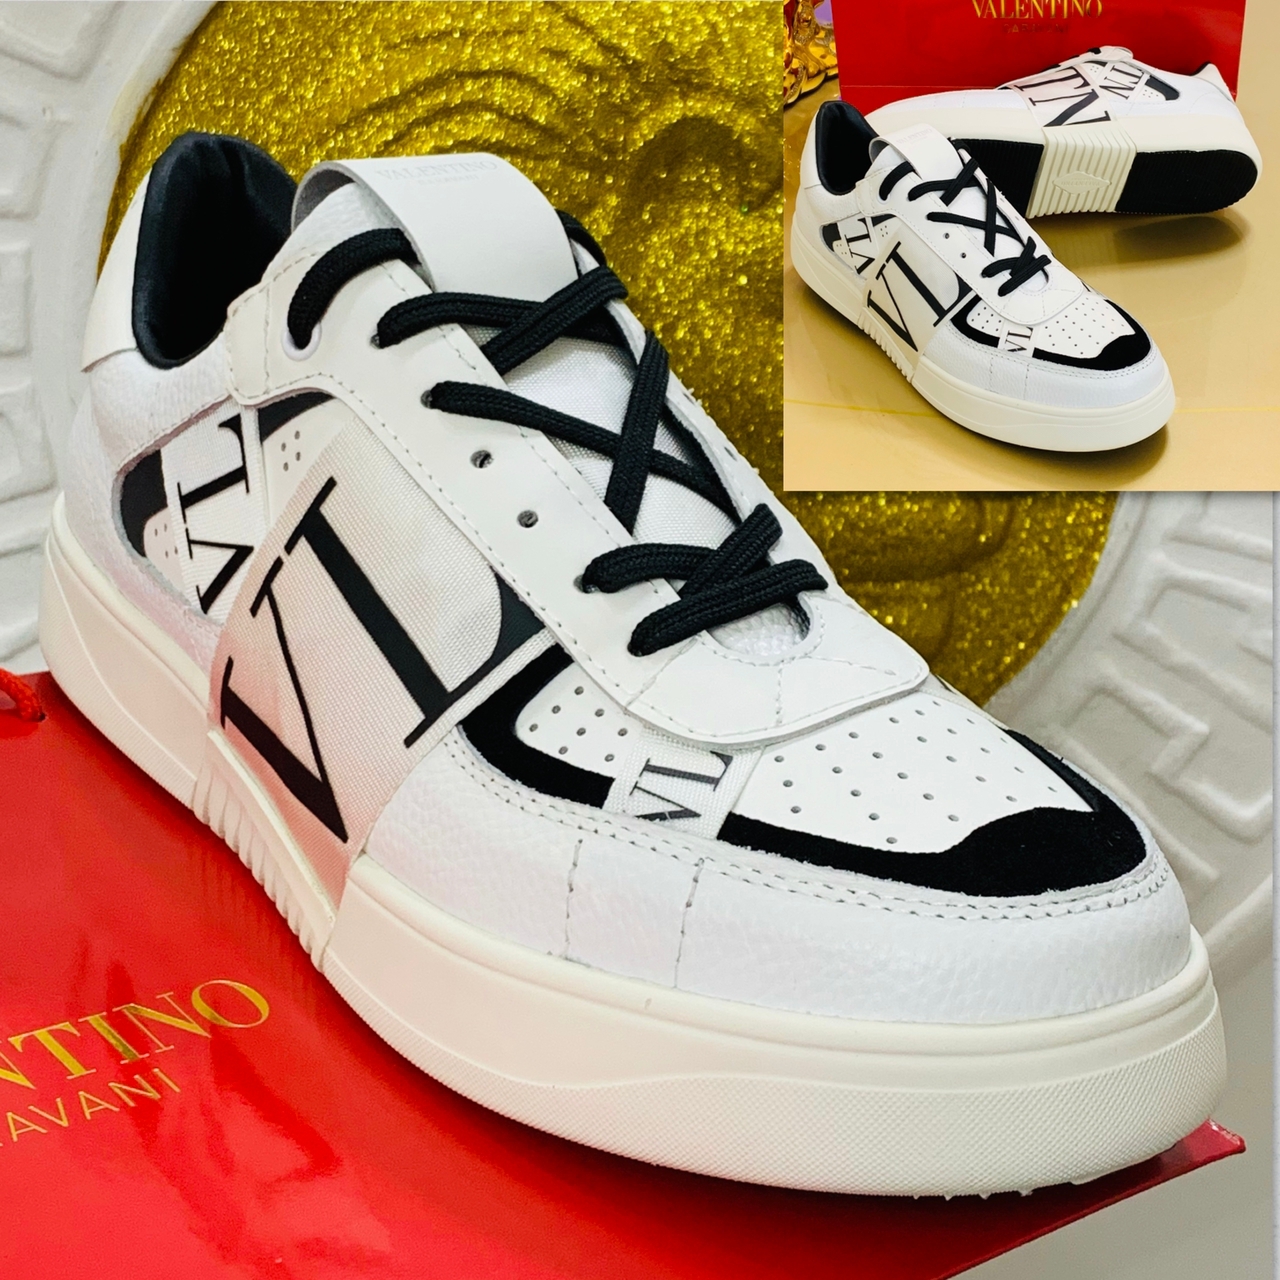 DESIGNERS SUMMER LEATHER TRAINER SNEAKERS for CartRollers Marketplace For Shopping Online, Fashion, Electronics, Phones, Computers and Buy Men Shoe, Home Appliances, Kitchenwares, Groceries Accessories,ankara, Aso Ebi, Beads, Boys Casual Wears, Children Children's Wears ,Corporate Shoes, Cosmetics Dress ,Dresses Fashion, Girls' Dresses ,Girls' Wears, Hair Care ,Jewelries ,Jewelry Kids, Kids' Fashion Ladies ,Wears Lapel Pins, Loafers Shoe Men ,Men's Caftan, Men's Casual Soes, Men's Fashion, Men's Shoes, Men's Wears, Moccasin Shoe, Natural Hair, In Lagos Nigeria